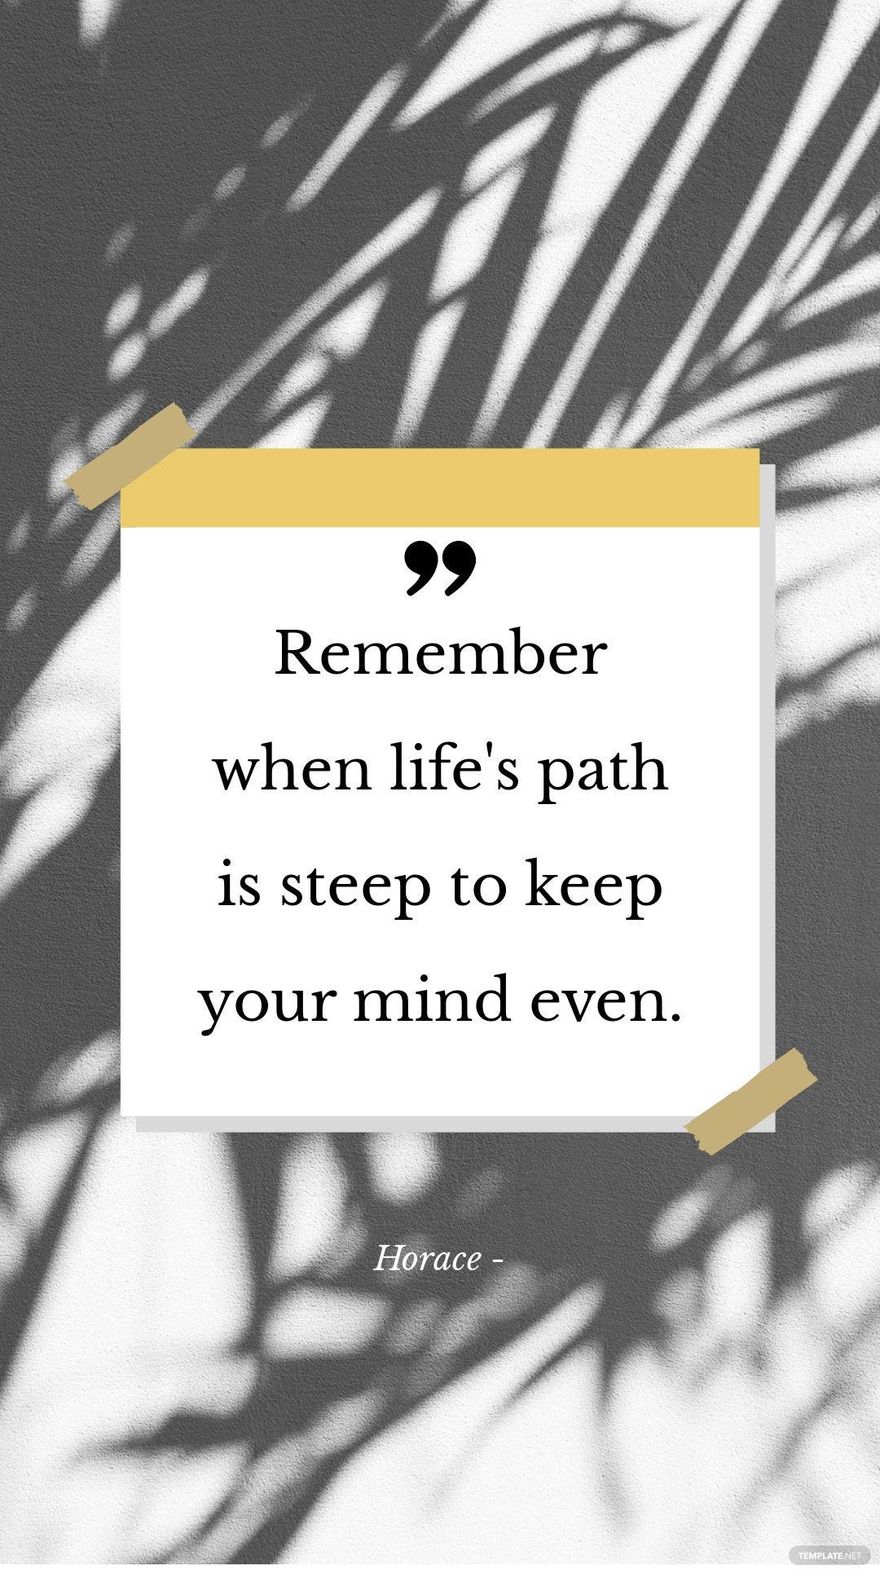 Horace - "Remember when life's path is steep to keep your mind even."